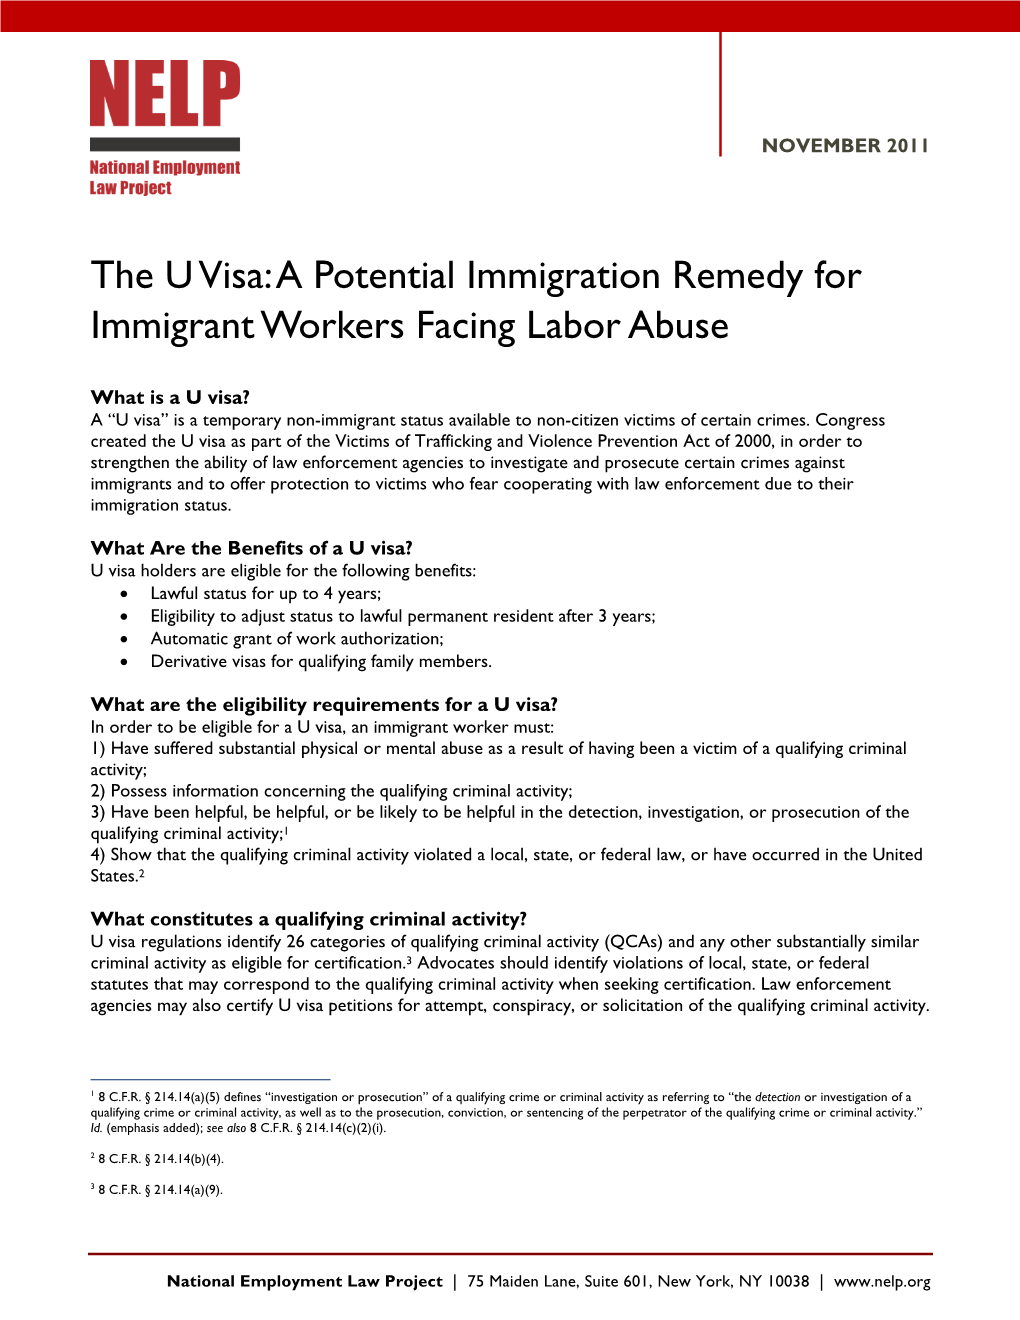 The U Visa: a Potential Immigration Remedy for Immigrant Workers Facing Labor Abuse